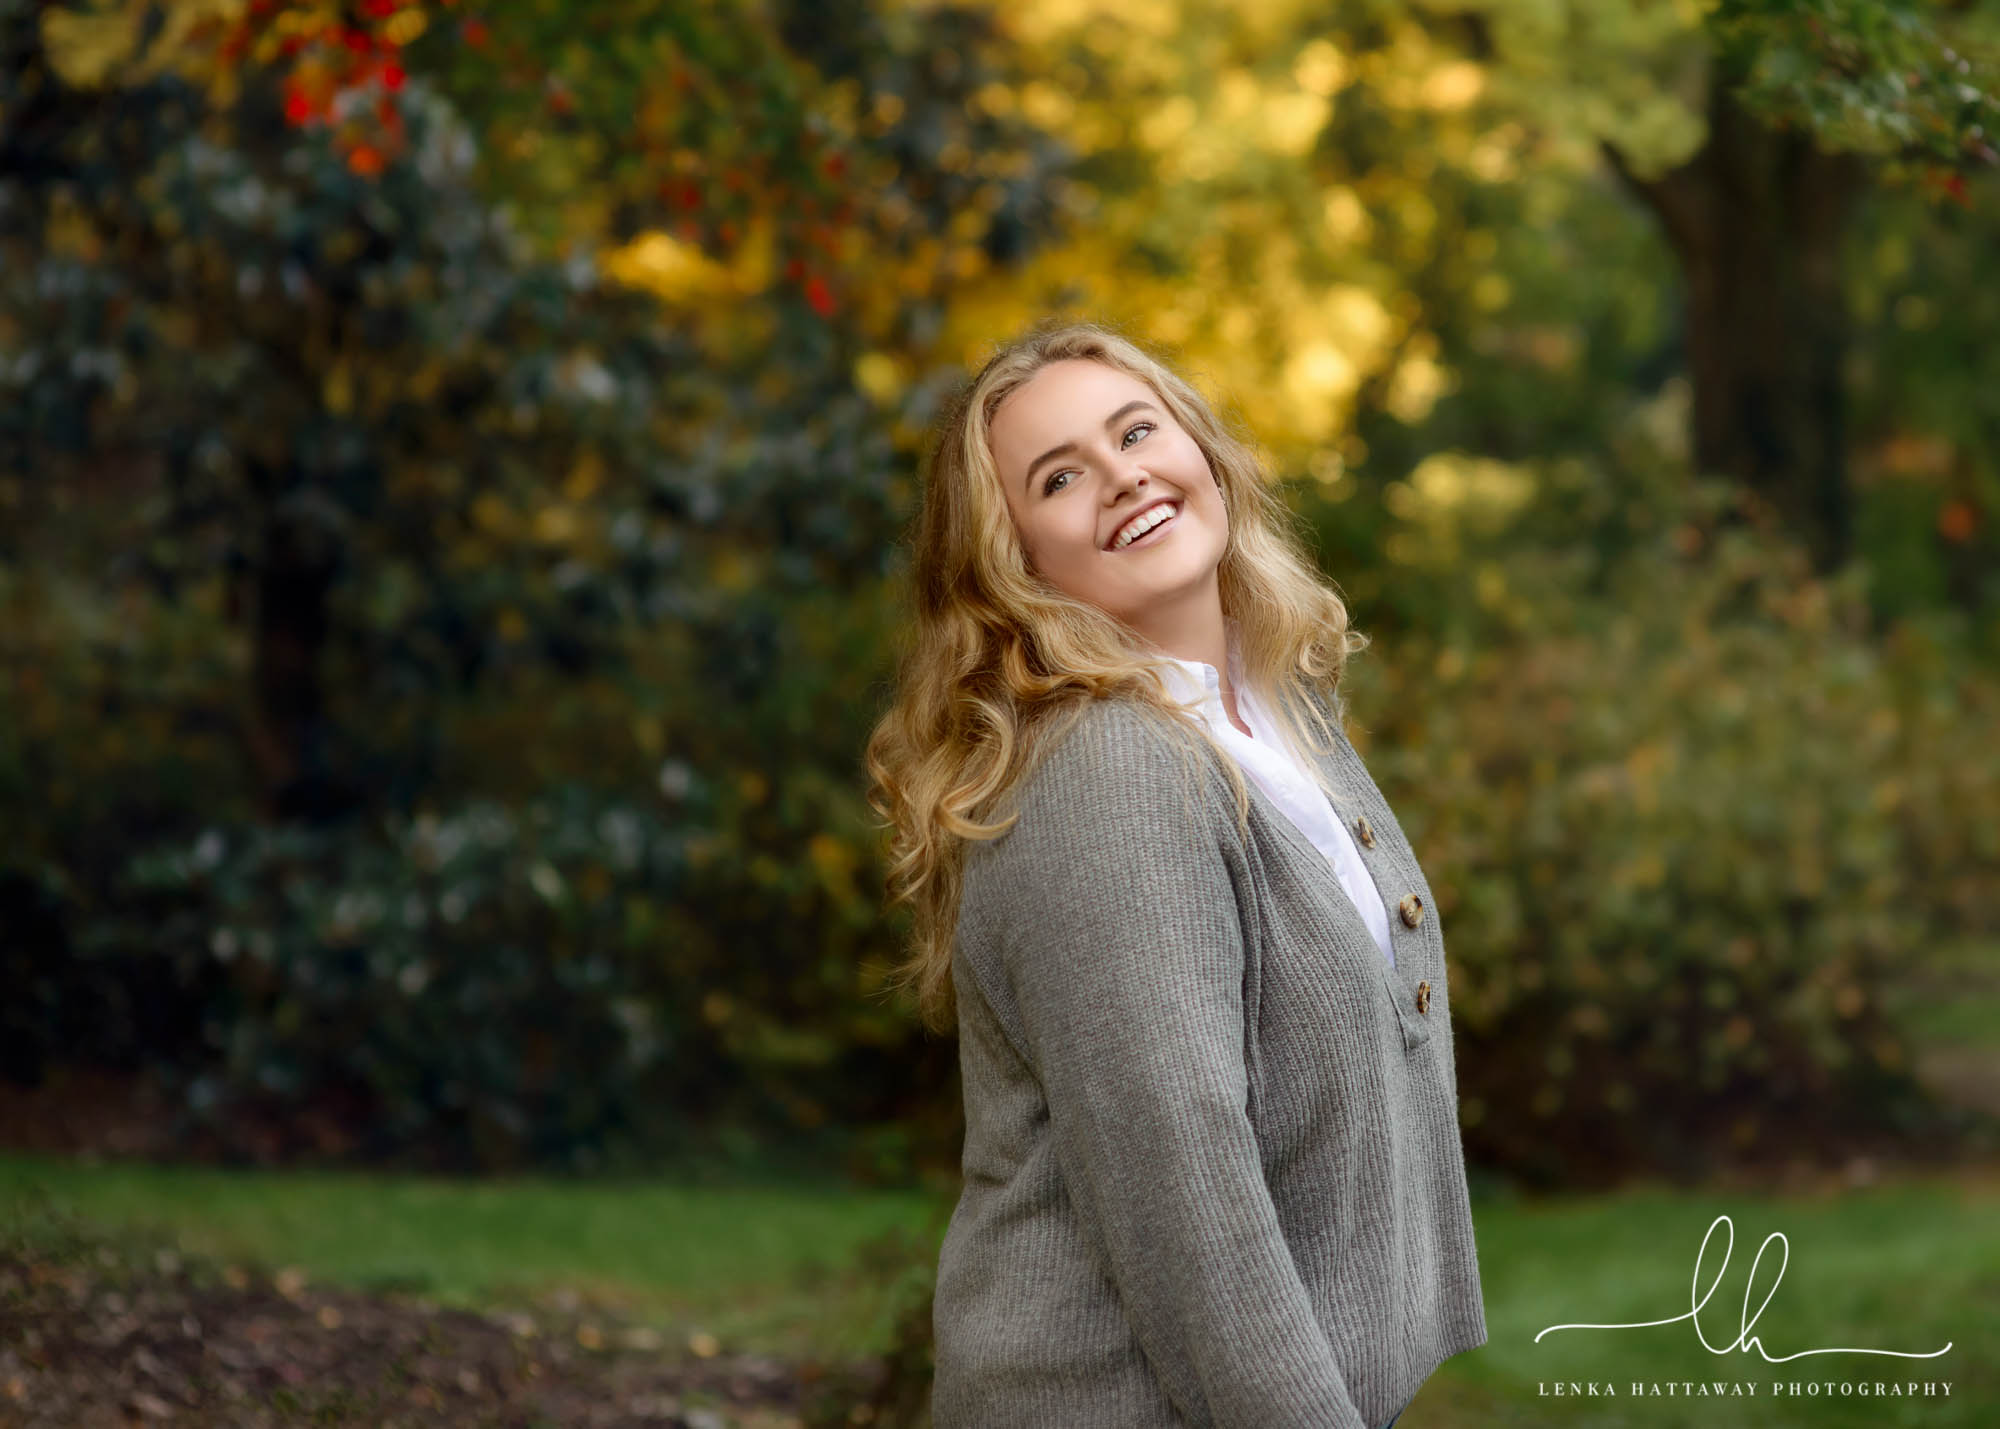 Senior in front of fall foliage suring her photo session.